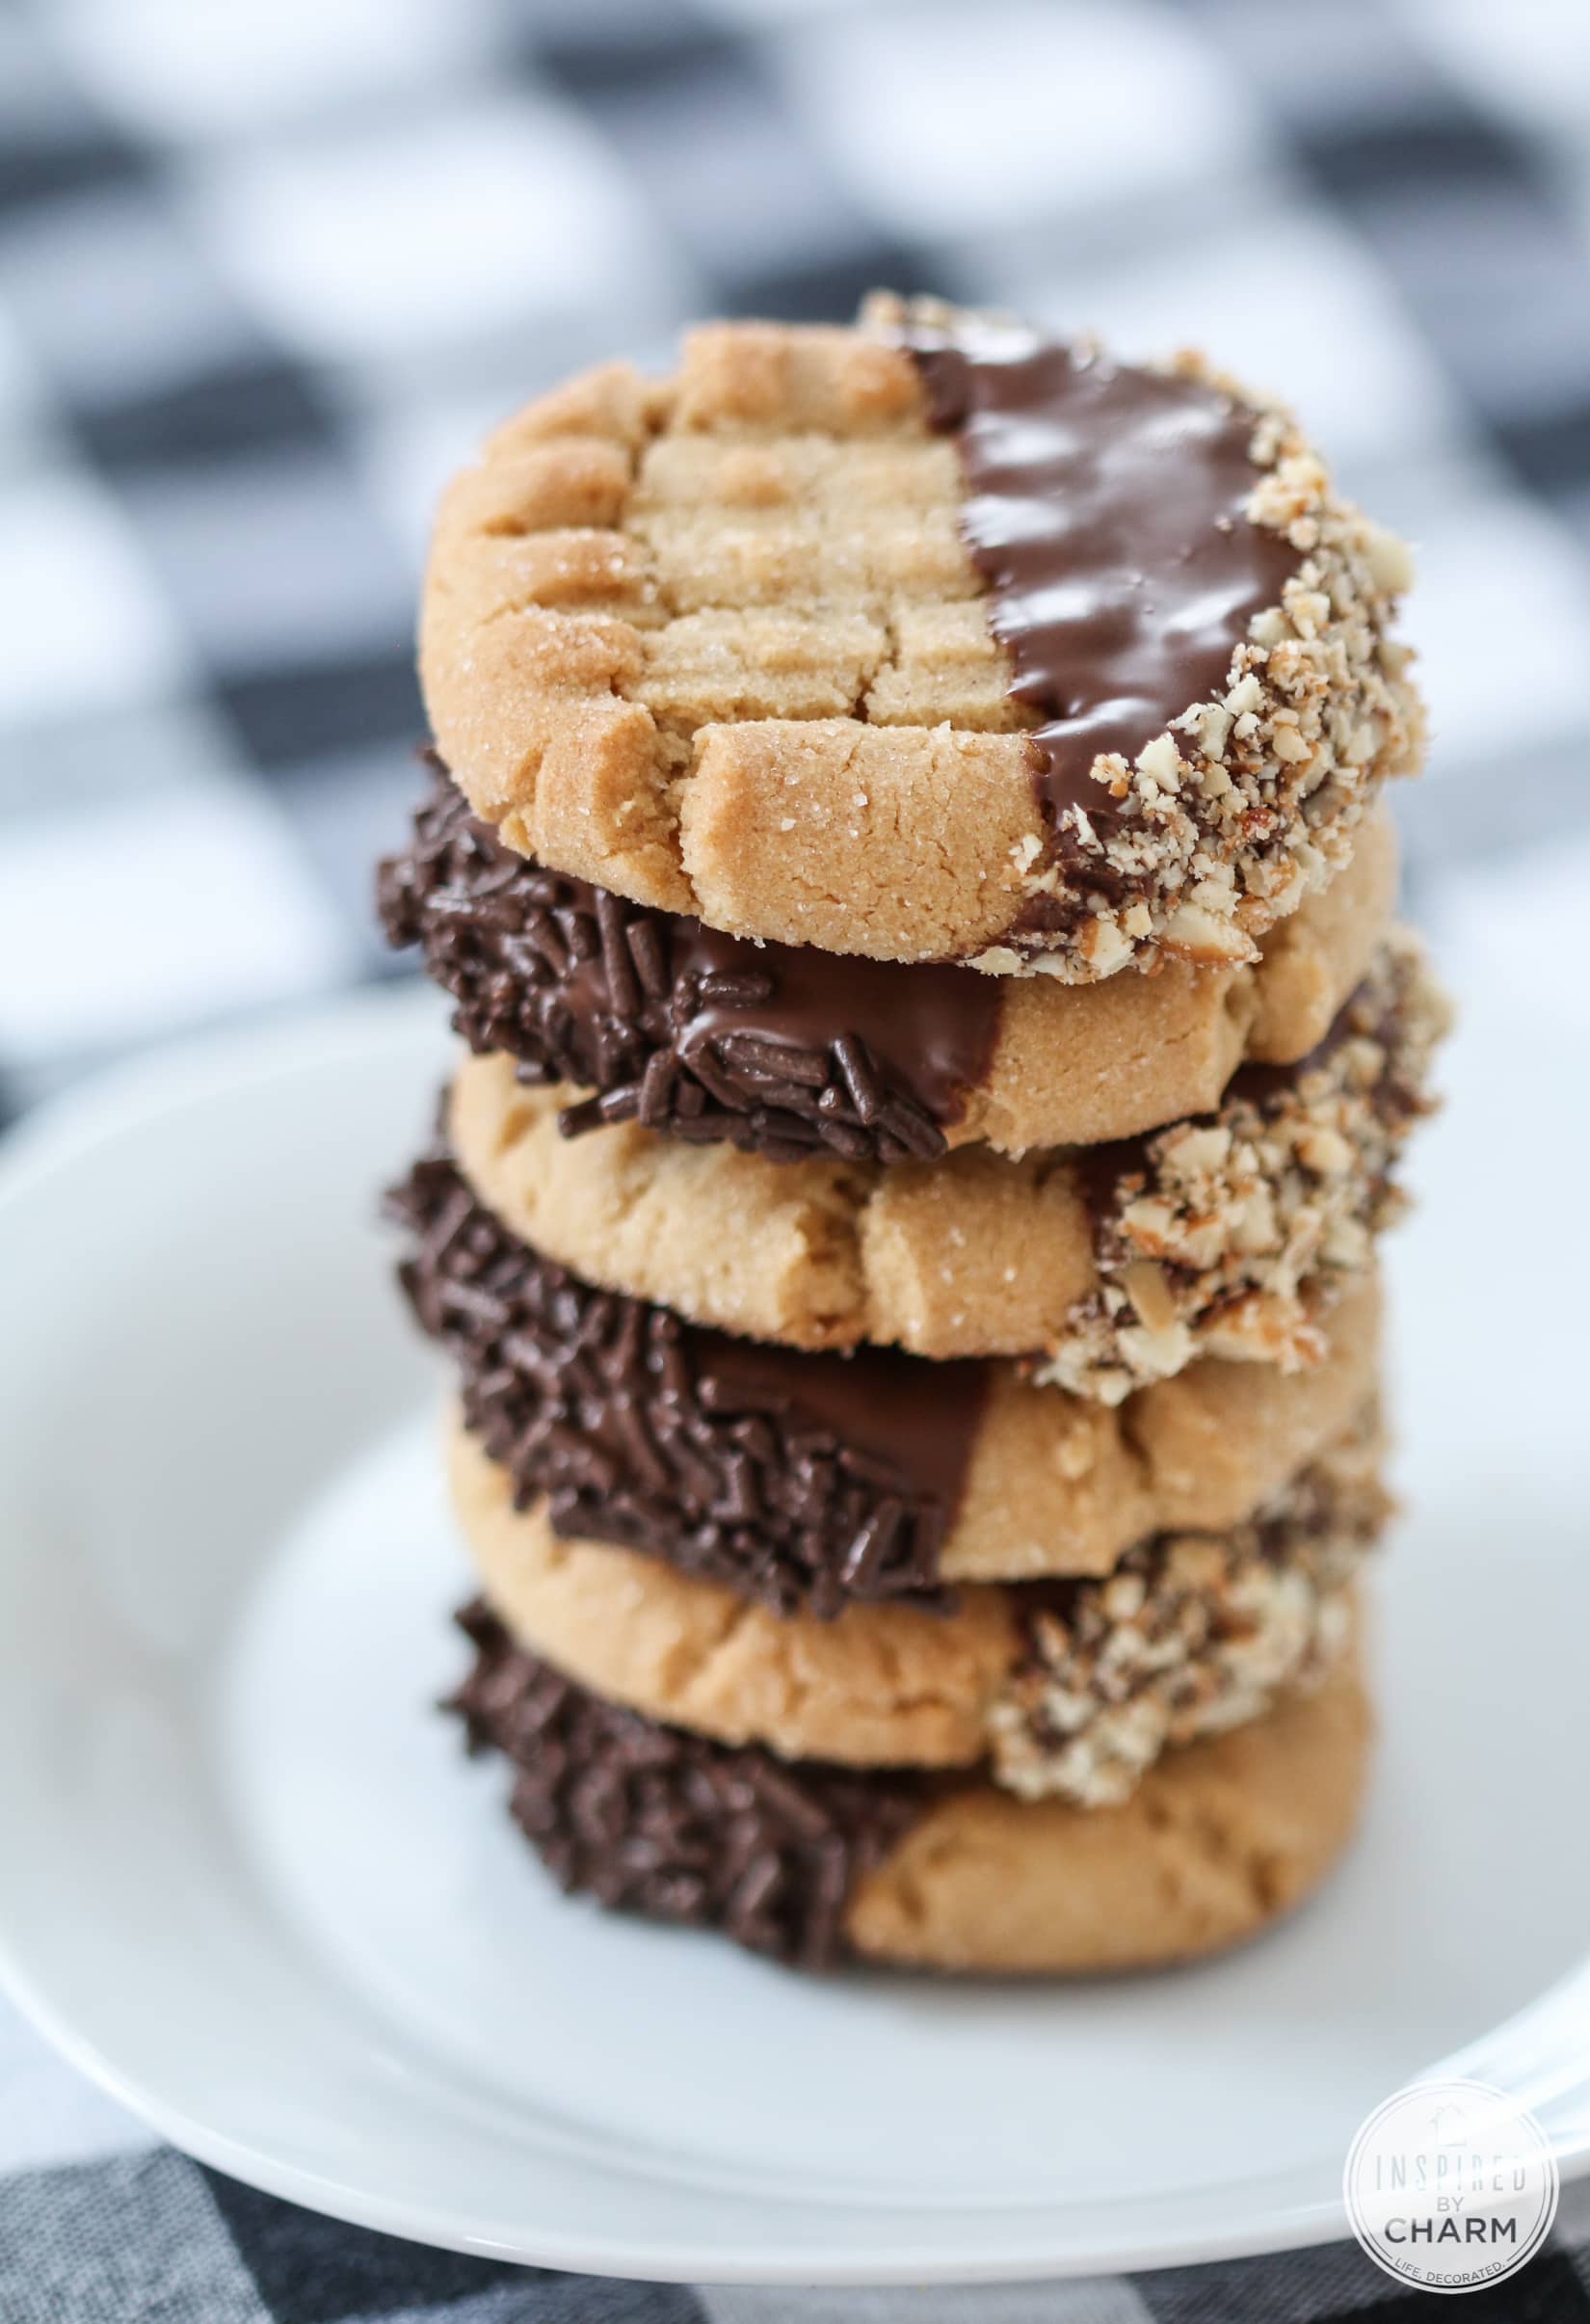 Chocolate-Dipped Peanut Butter Cookies - Inspired by Charm